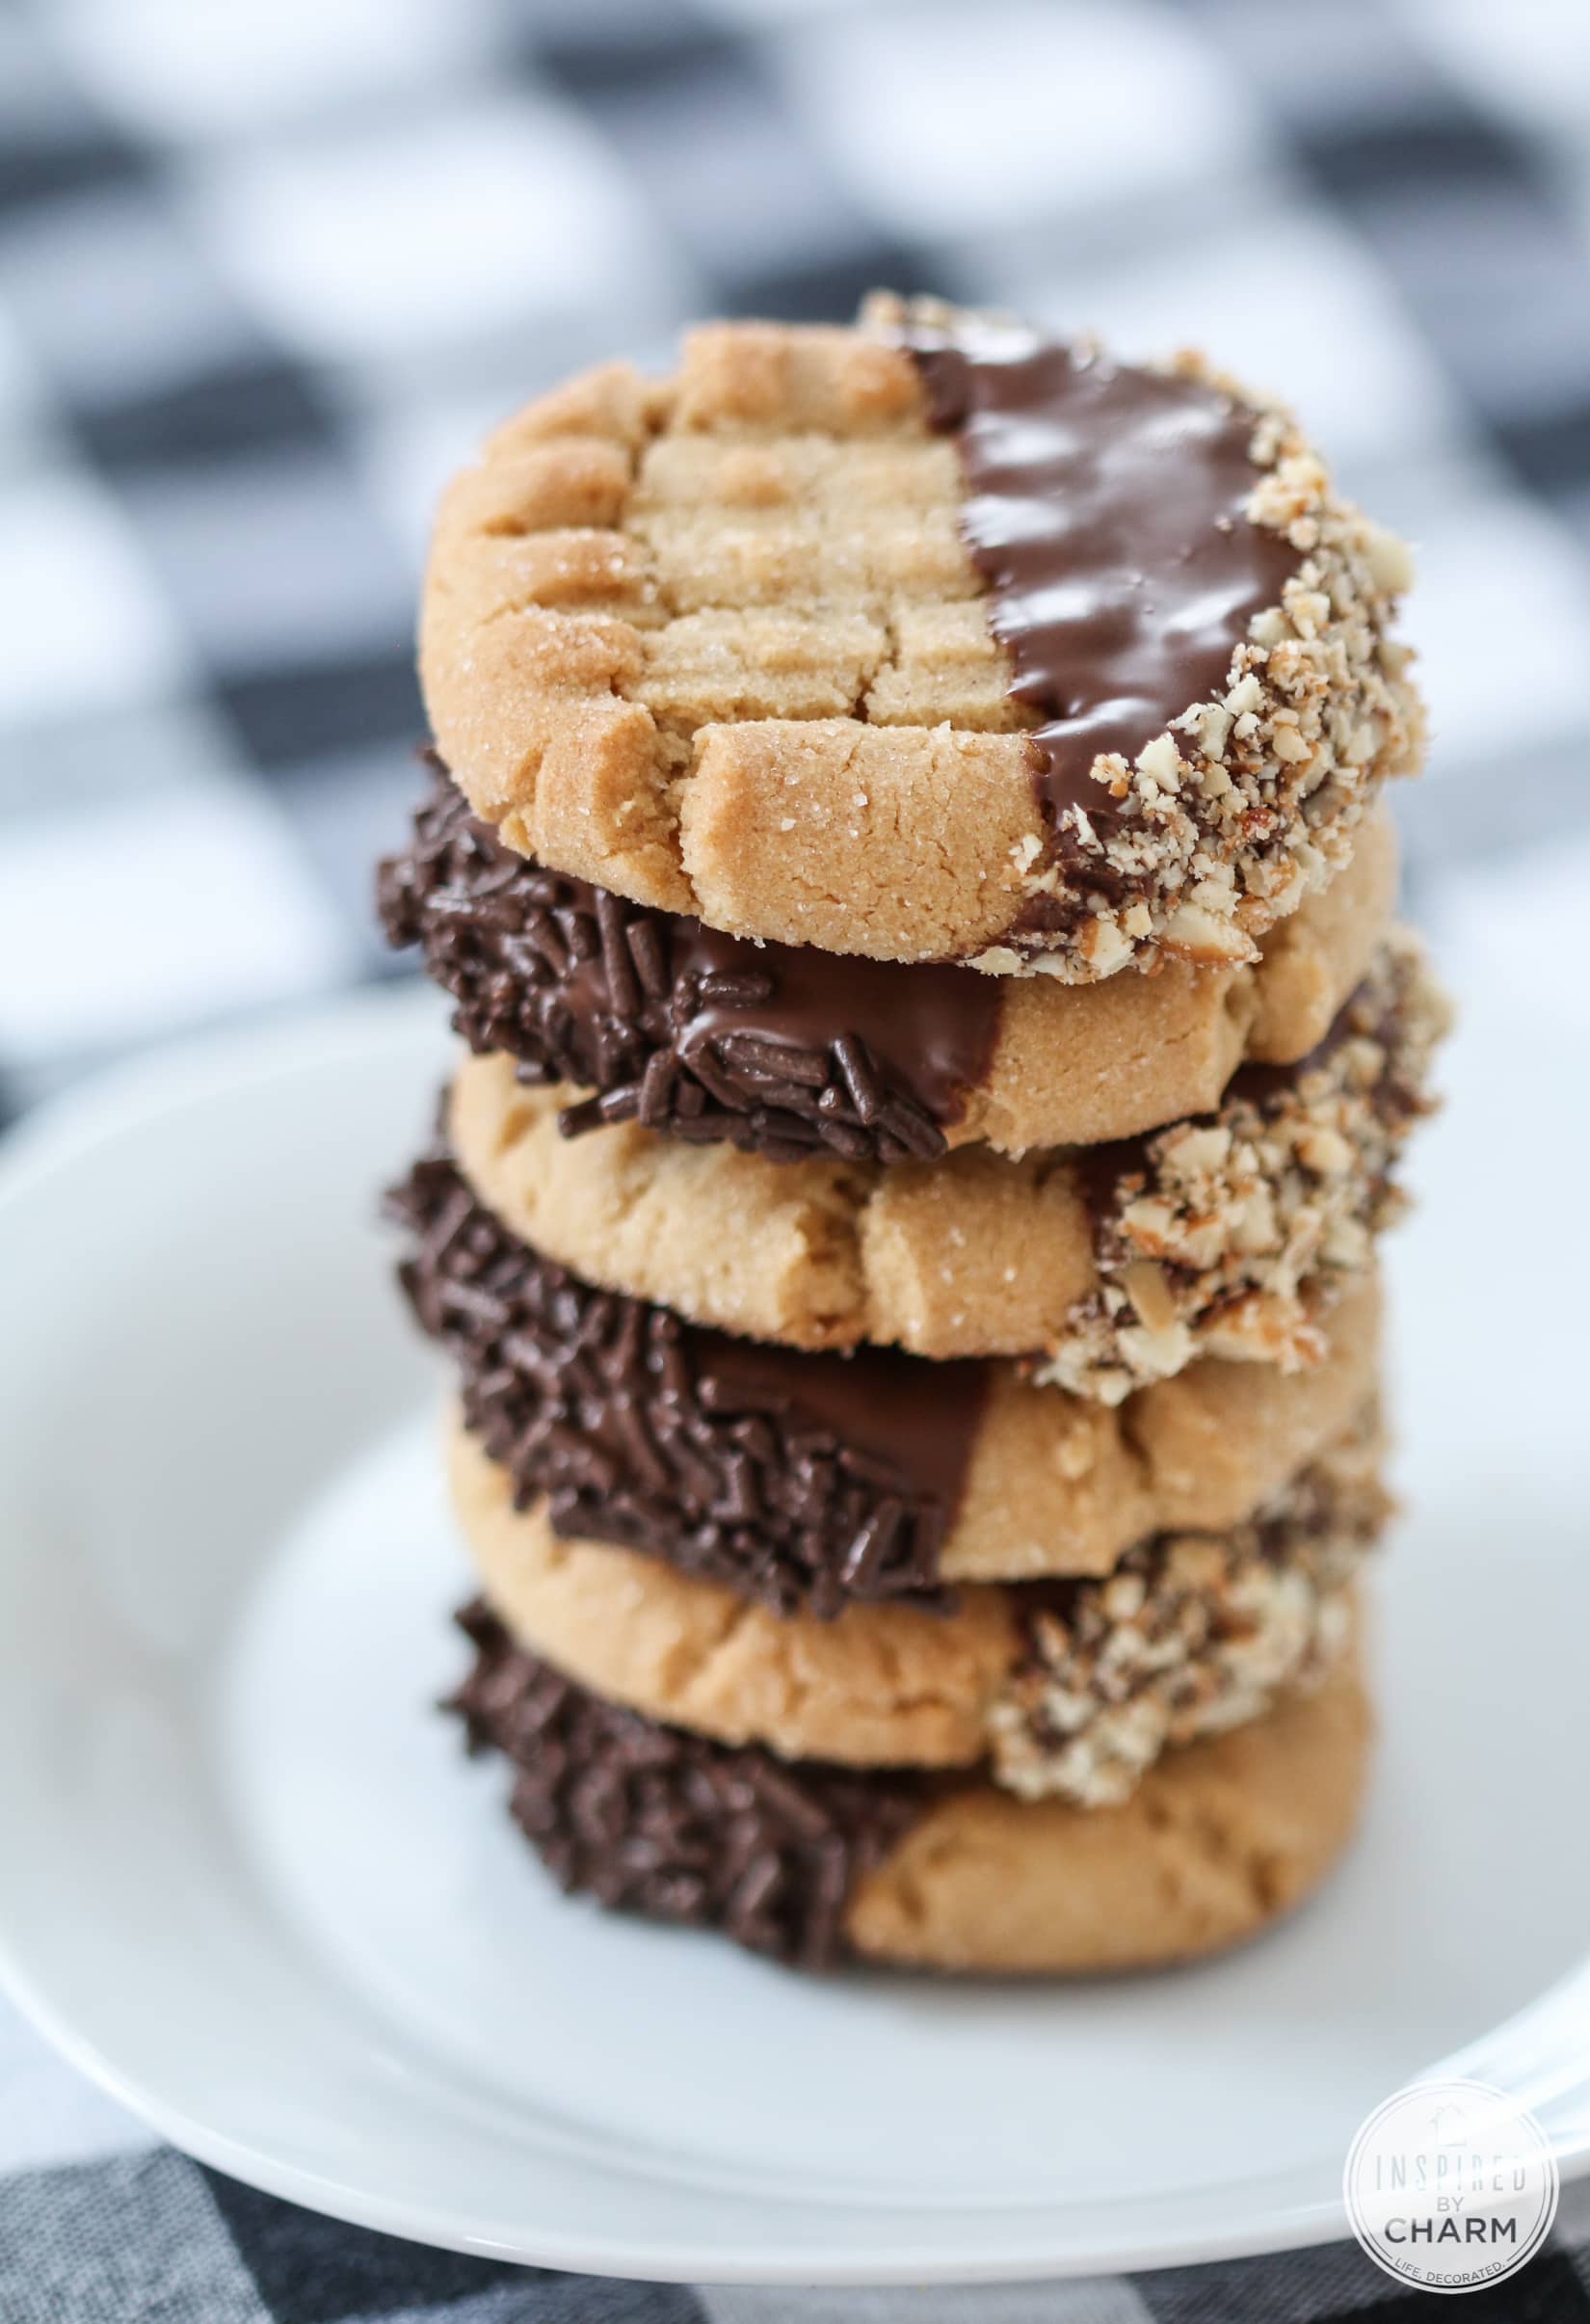 Chocolate-Dipped Peanut Butter Cookies - Inspired by Charm